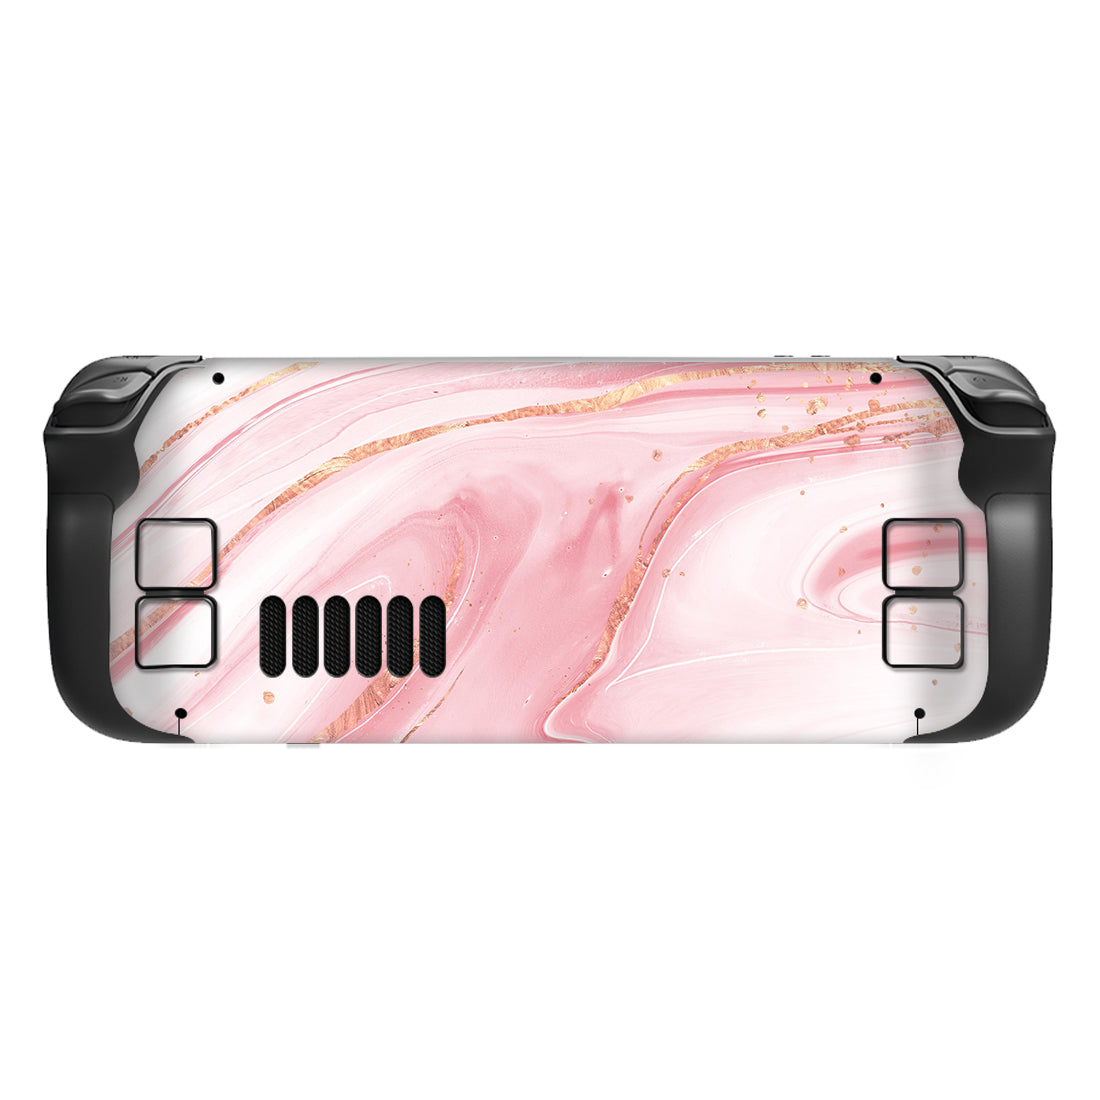 PlayVital Full Set Protective Skin Decal for Steam Deck, Custom Stickers Vinyl Cover for Steam Deck Handheld Gaming PC - Pink Gold Marble - SDTM031 playvital